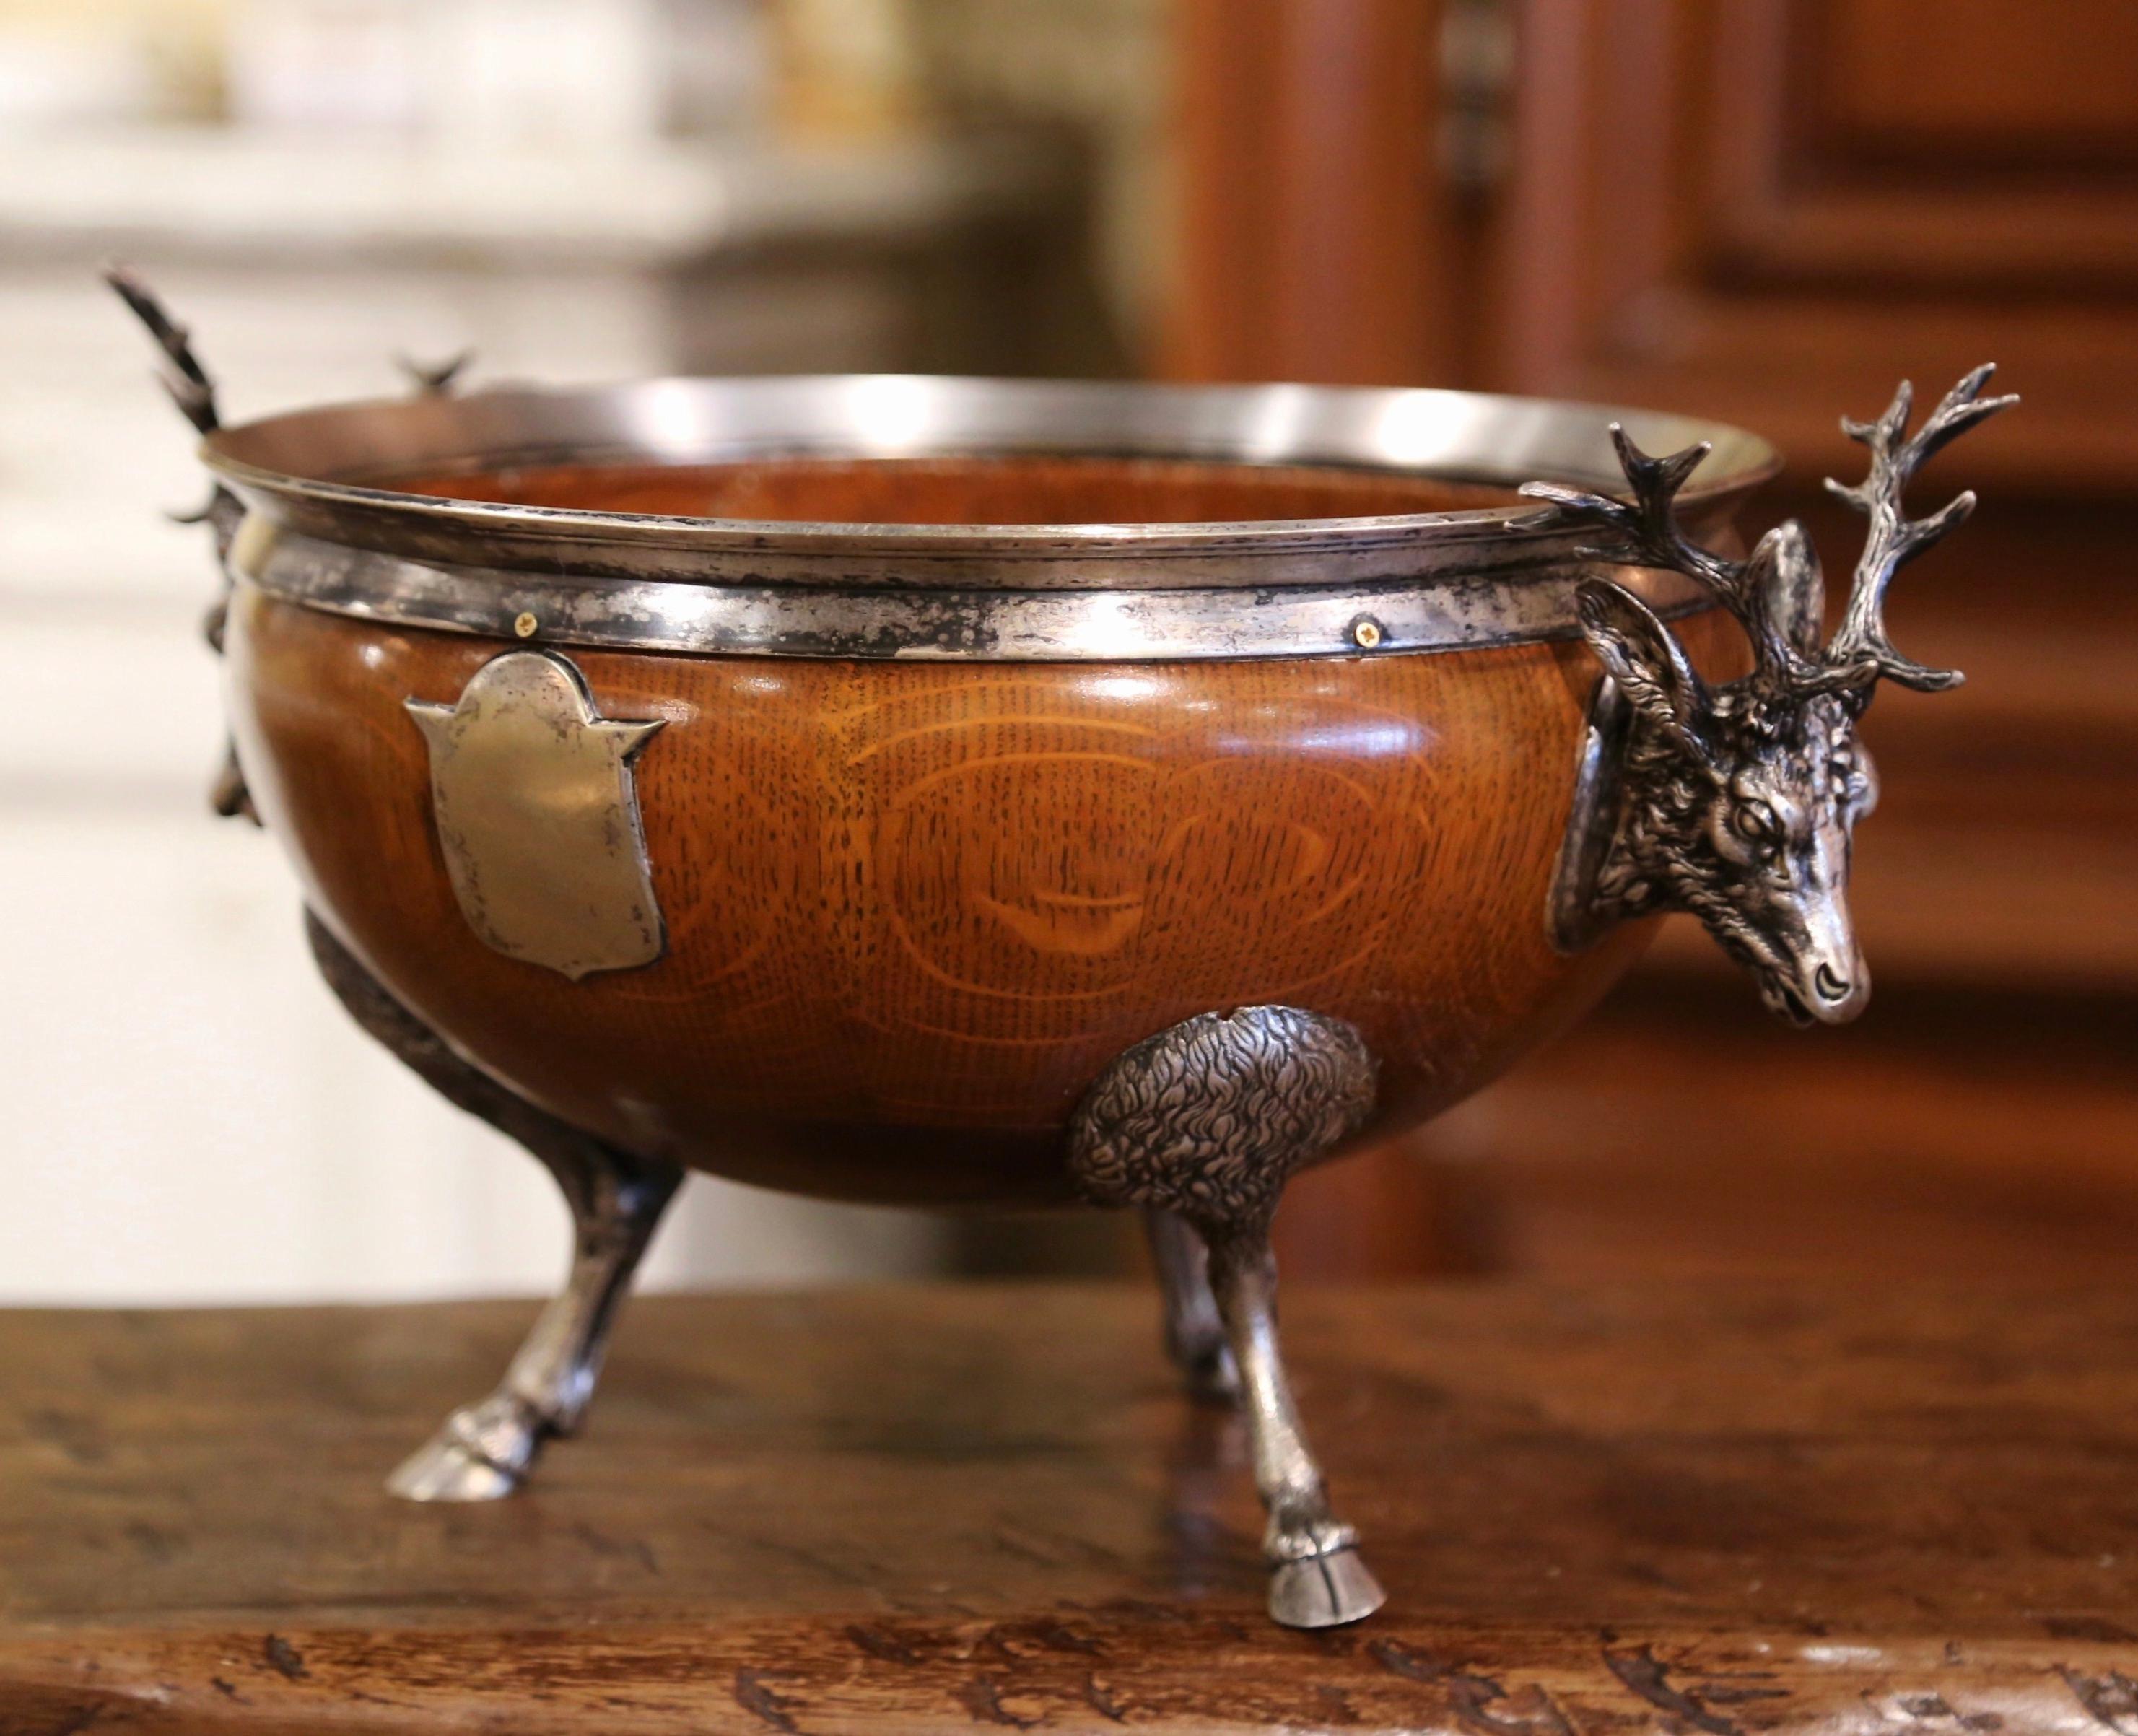 Decorate a dining table or a console with this elegant antique bowl. Crafted in England circa 1880, the round oak dish stands on silver plated hoof feet, and is decorated with stag head figure handles and embellished with a shield on both sides. The